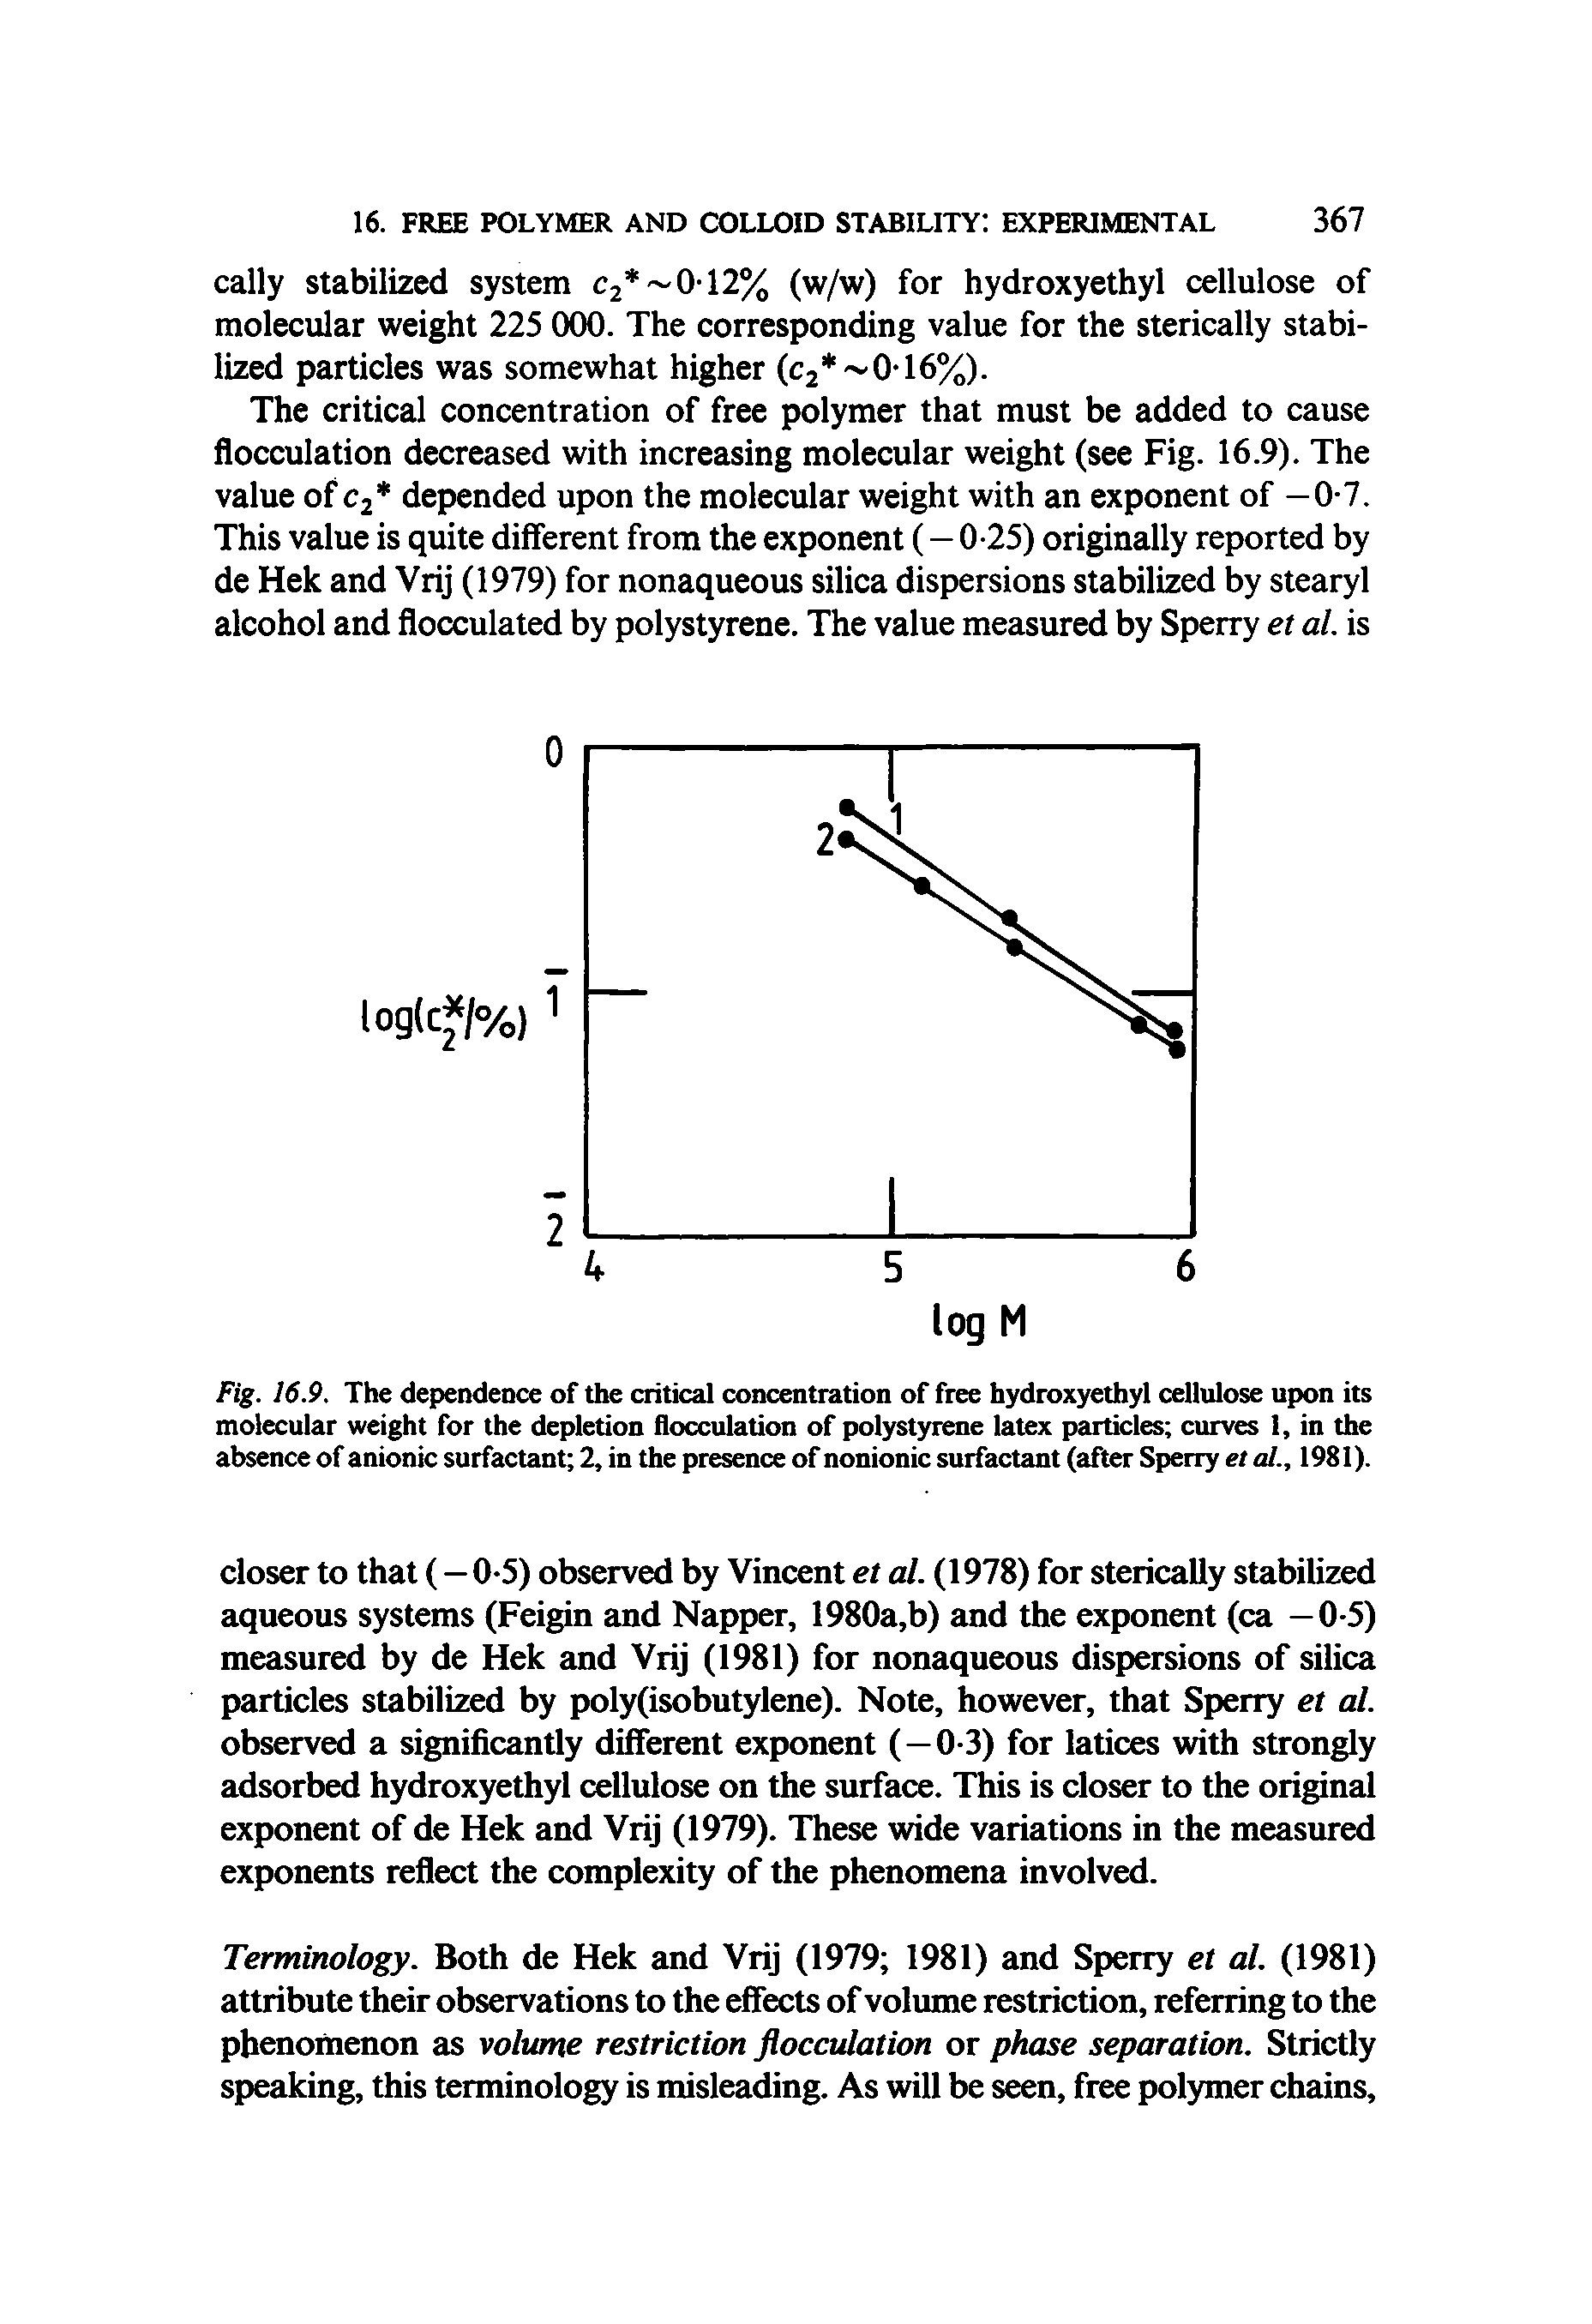 Fig. 16.9. The dependence of the critical concentration of free hydroxyethyl cellulose upon its molecular weight for the depletion flocculation of polystyrene latex particles curves 1, in the absence of anionic surfactant 2, in the presence of nonionic surfactant (after Sperry et al., 1981).